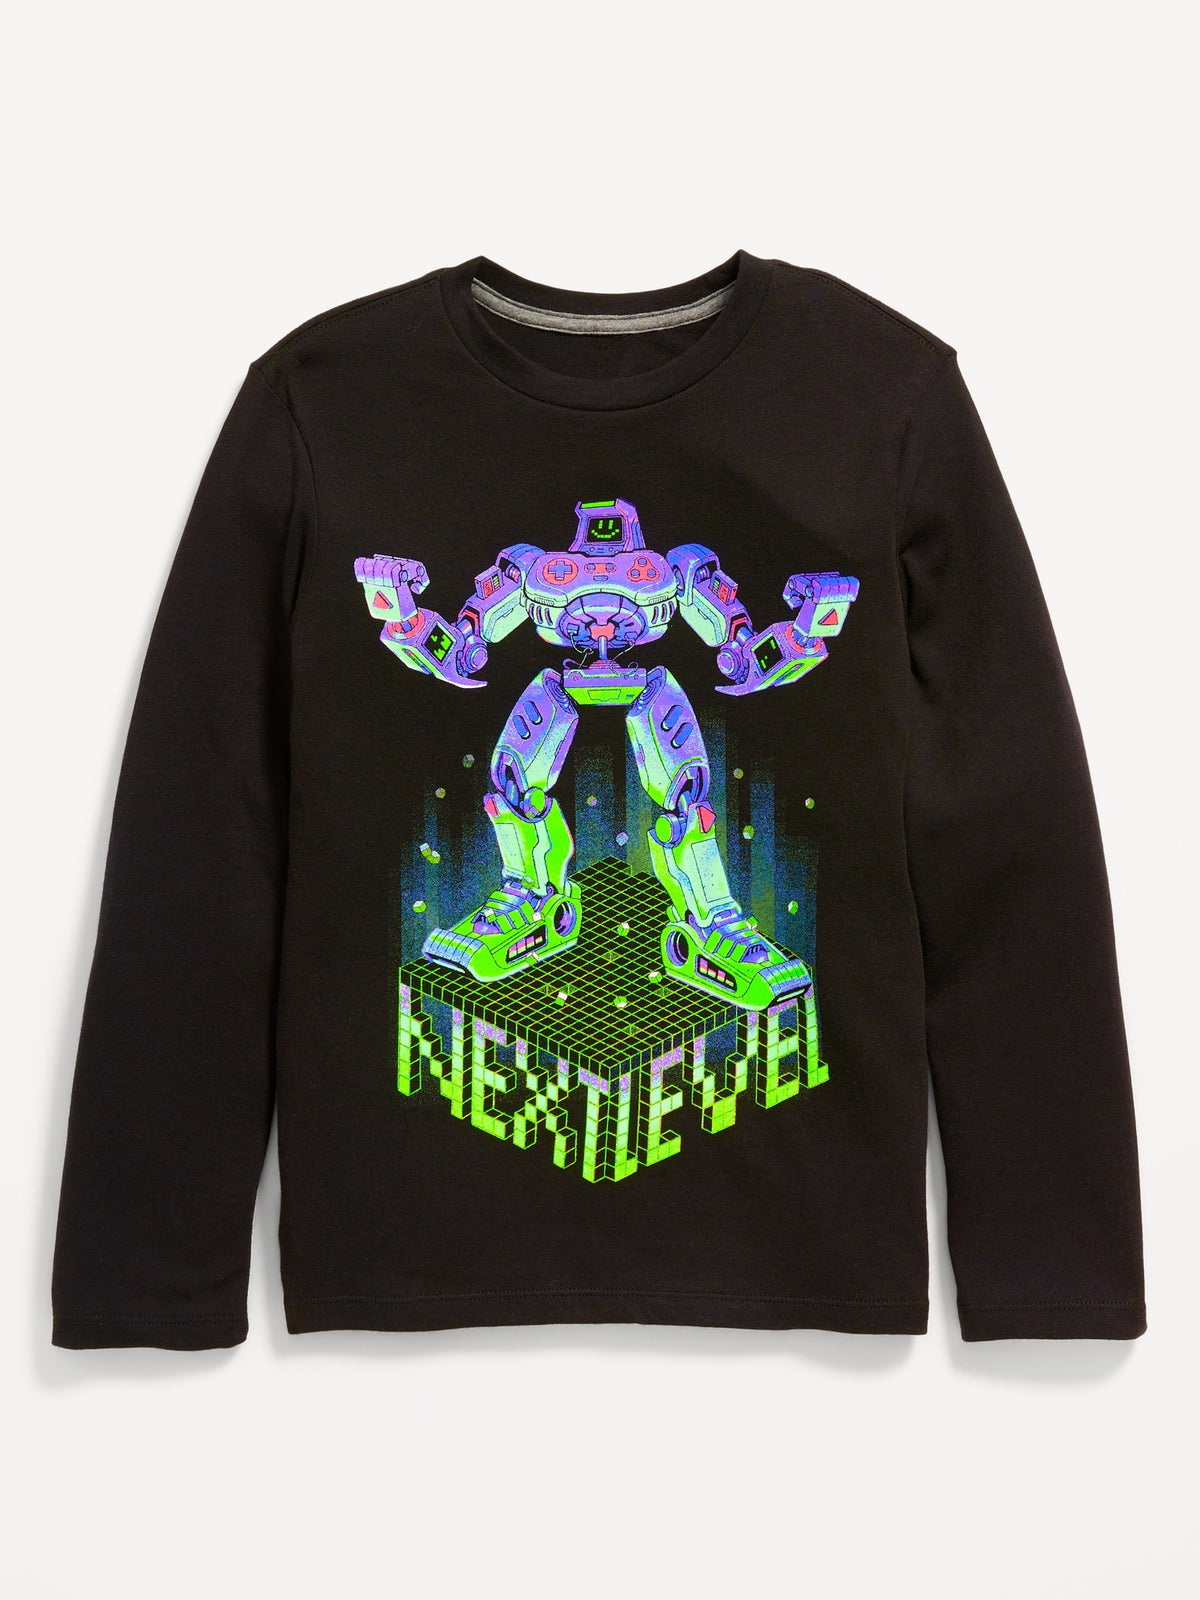 Long-Sleeve Graphic T-Shirt for Boys